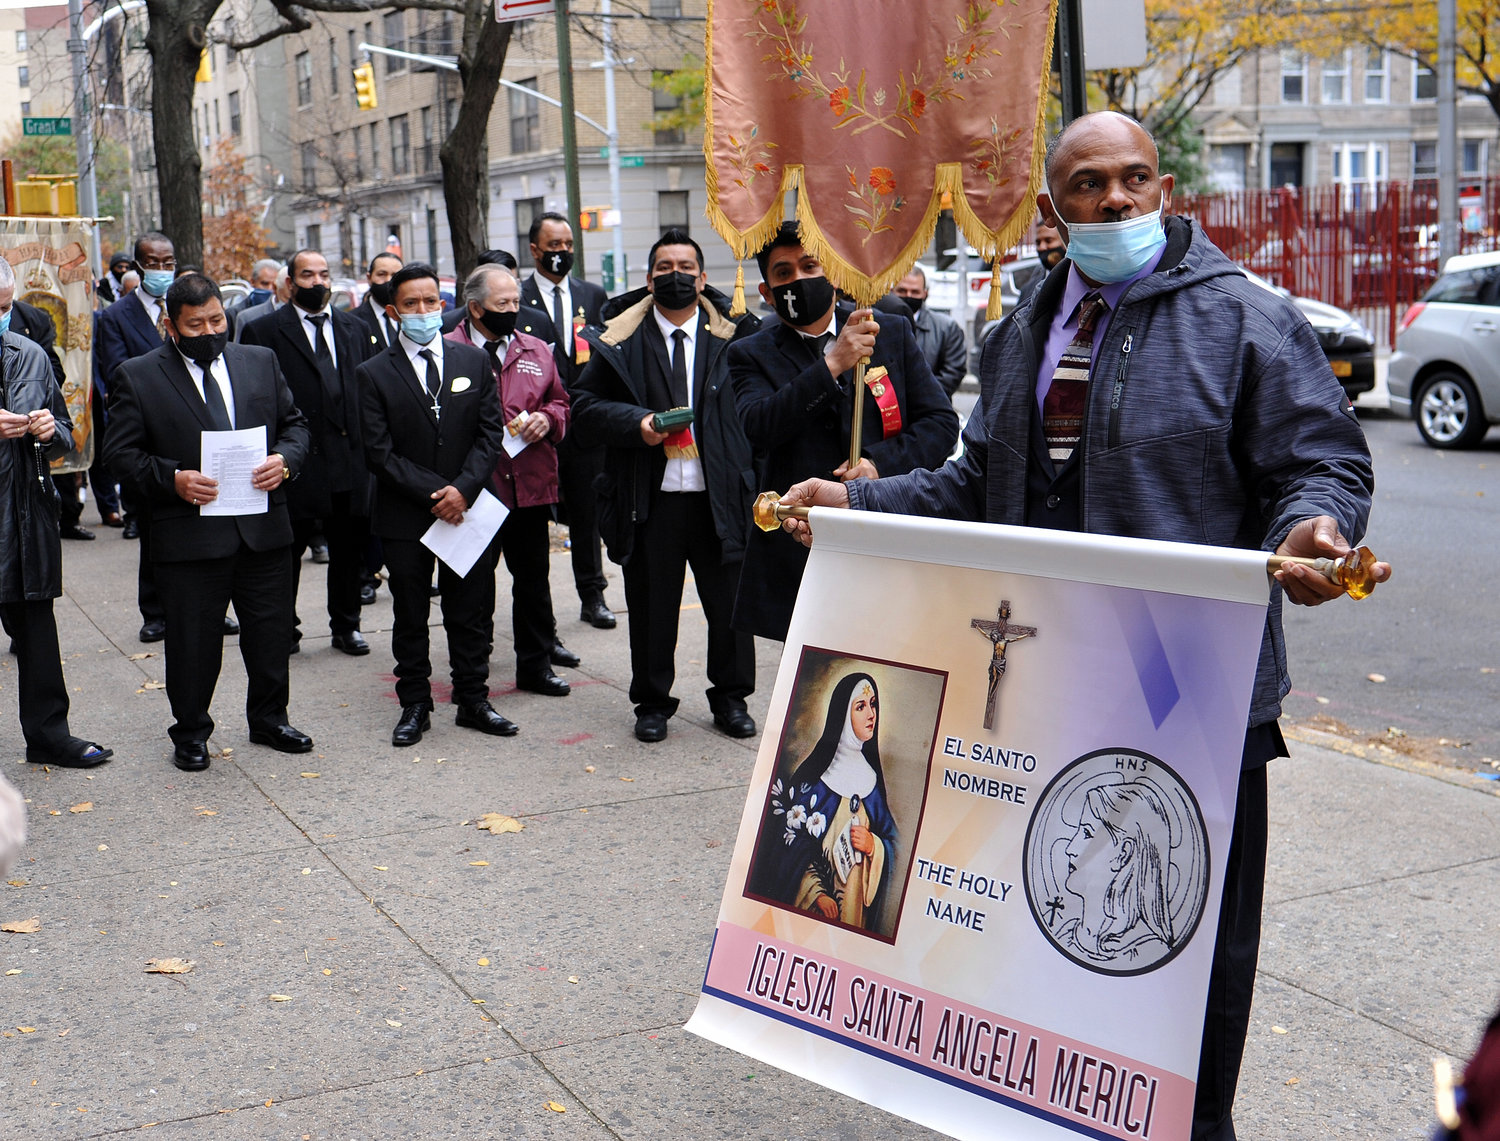 Faithful members of the archdiocesan Holy Name Society’s Hispanic Division gather Nov. 21 before a brief procession outside St. Angela Merici parish in the Bronx for a Mass commemorating the Feast of Christ the King. It was the third annual Mass sponsored by the division.